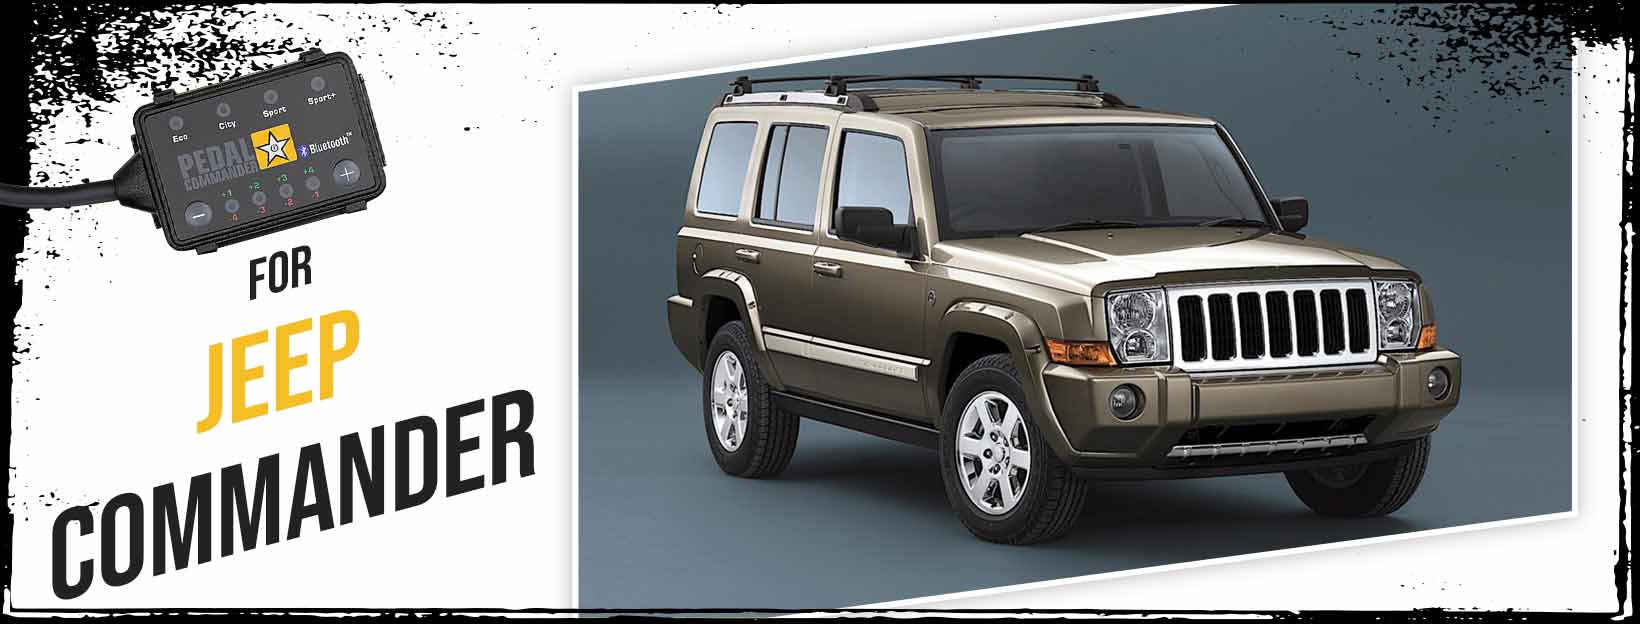 Pedal Commander for Jeep Commander